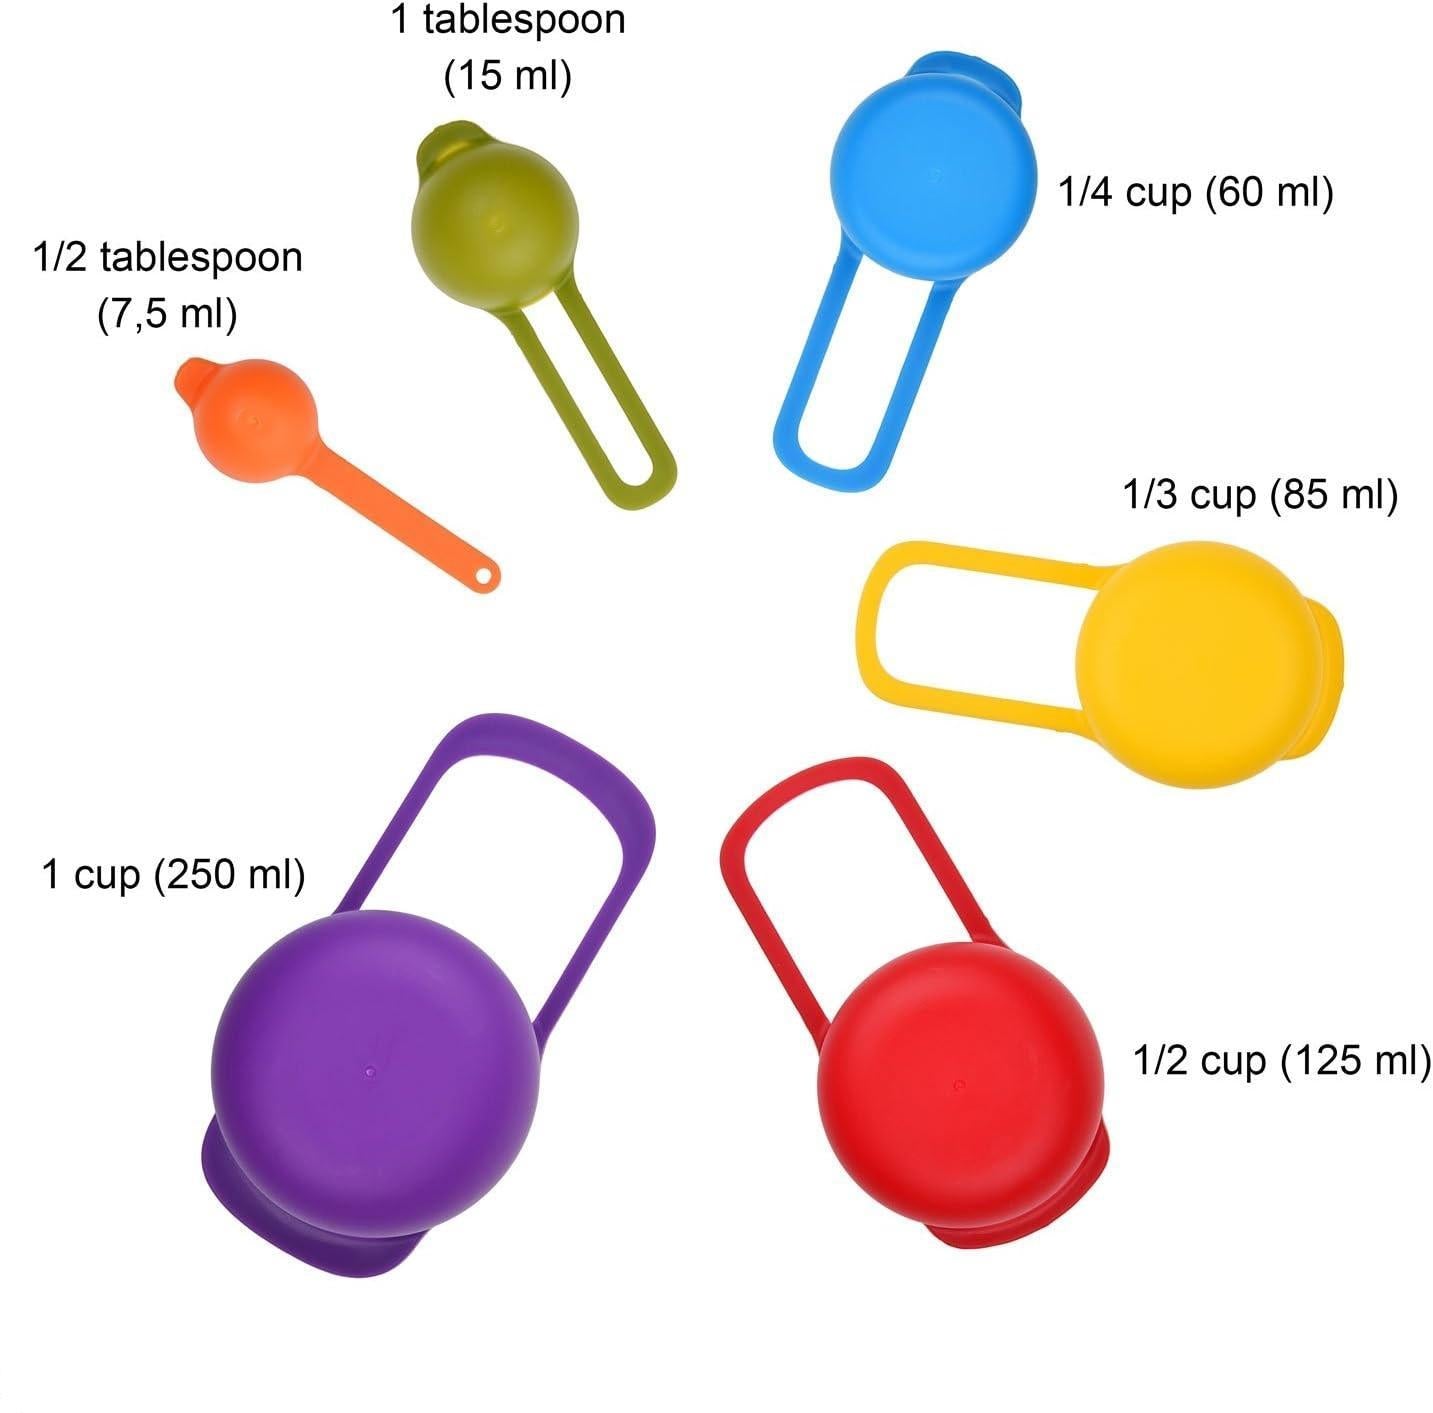 6PCS Measuring Cups And Spoons, Little Cook Colorful Measuring Cups And Spoons Set, Stackable Measuring Spoons, Nesting Plastic Measuring Cups,Dishwasher Safe - Durable Ramdon Colors